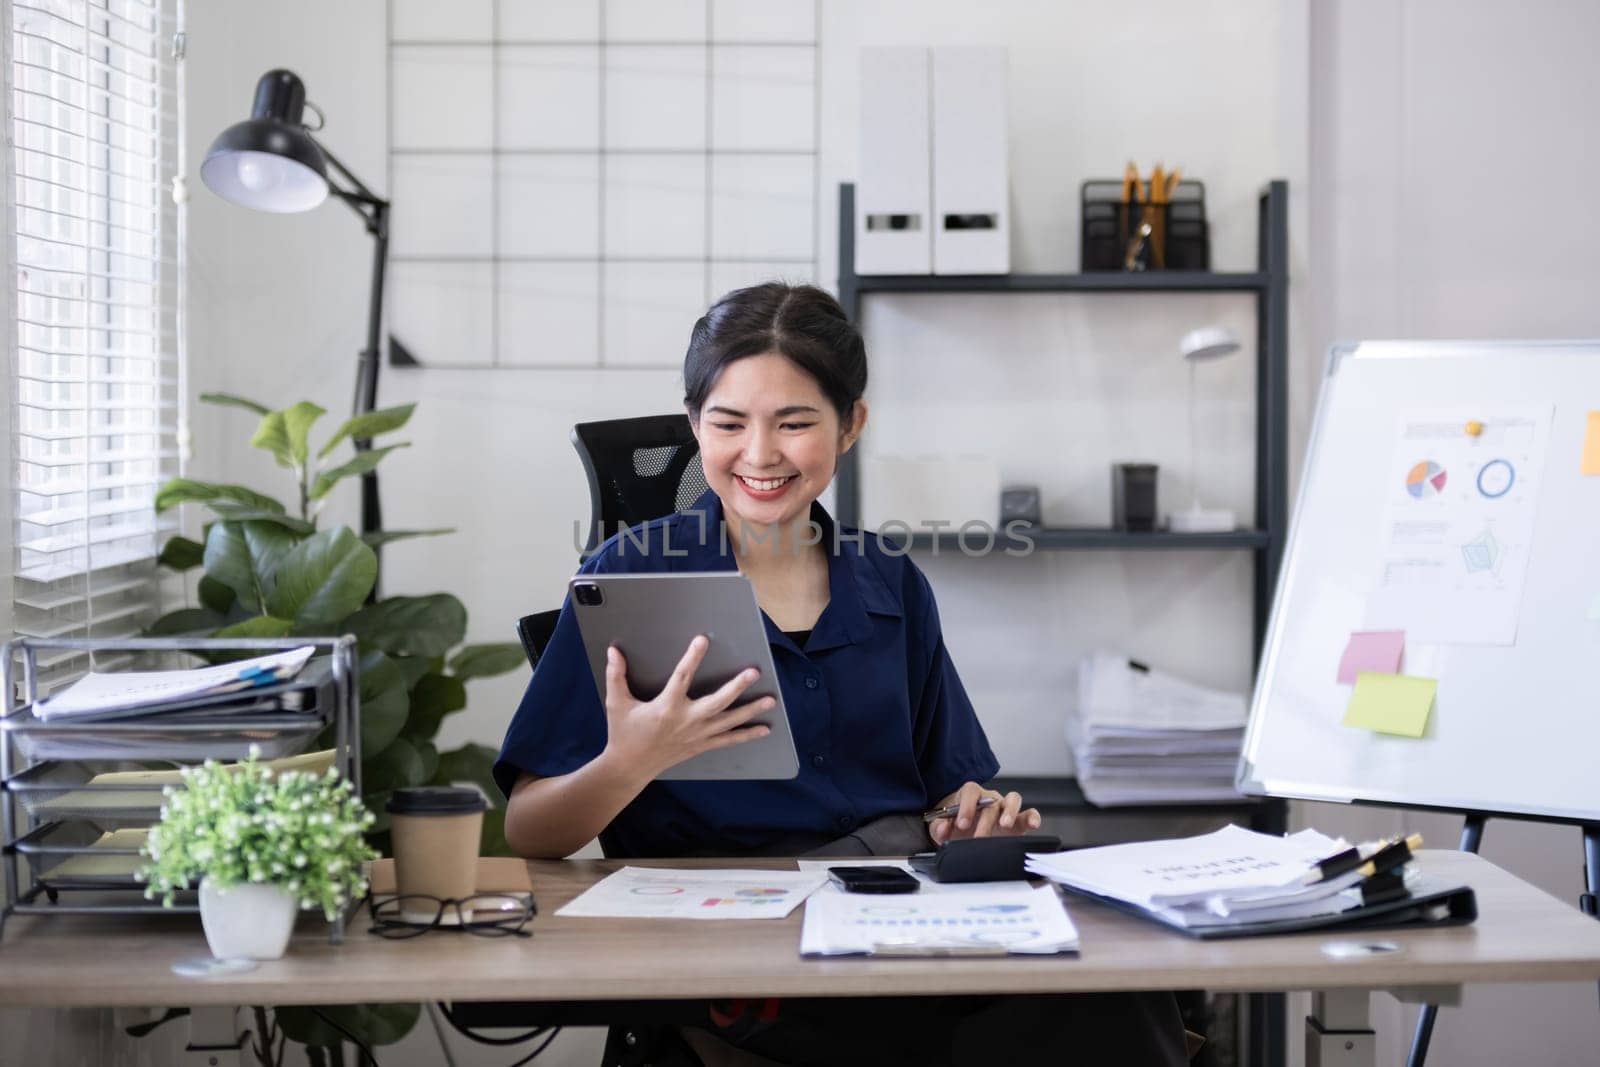 Young Asian woman using tablet in office workspace. Concept of business technology and productivity.